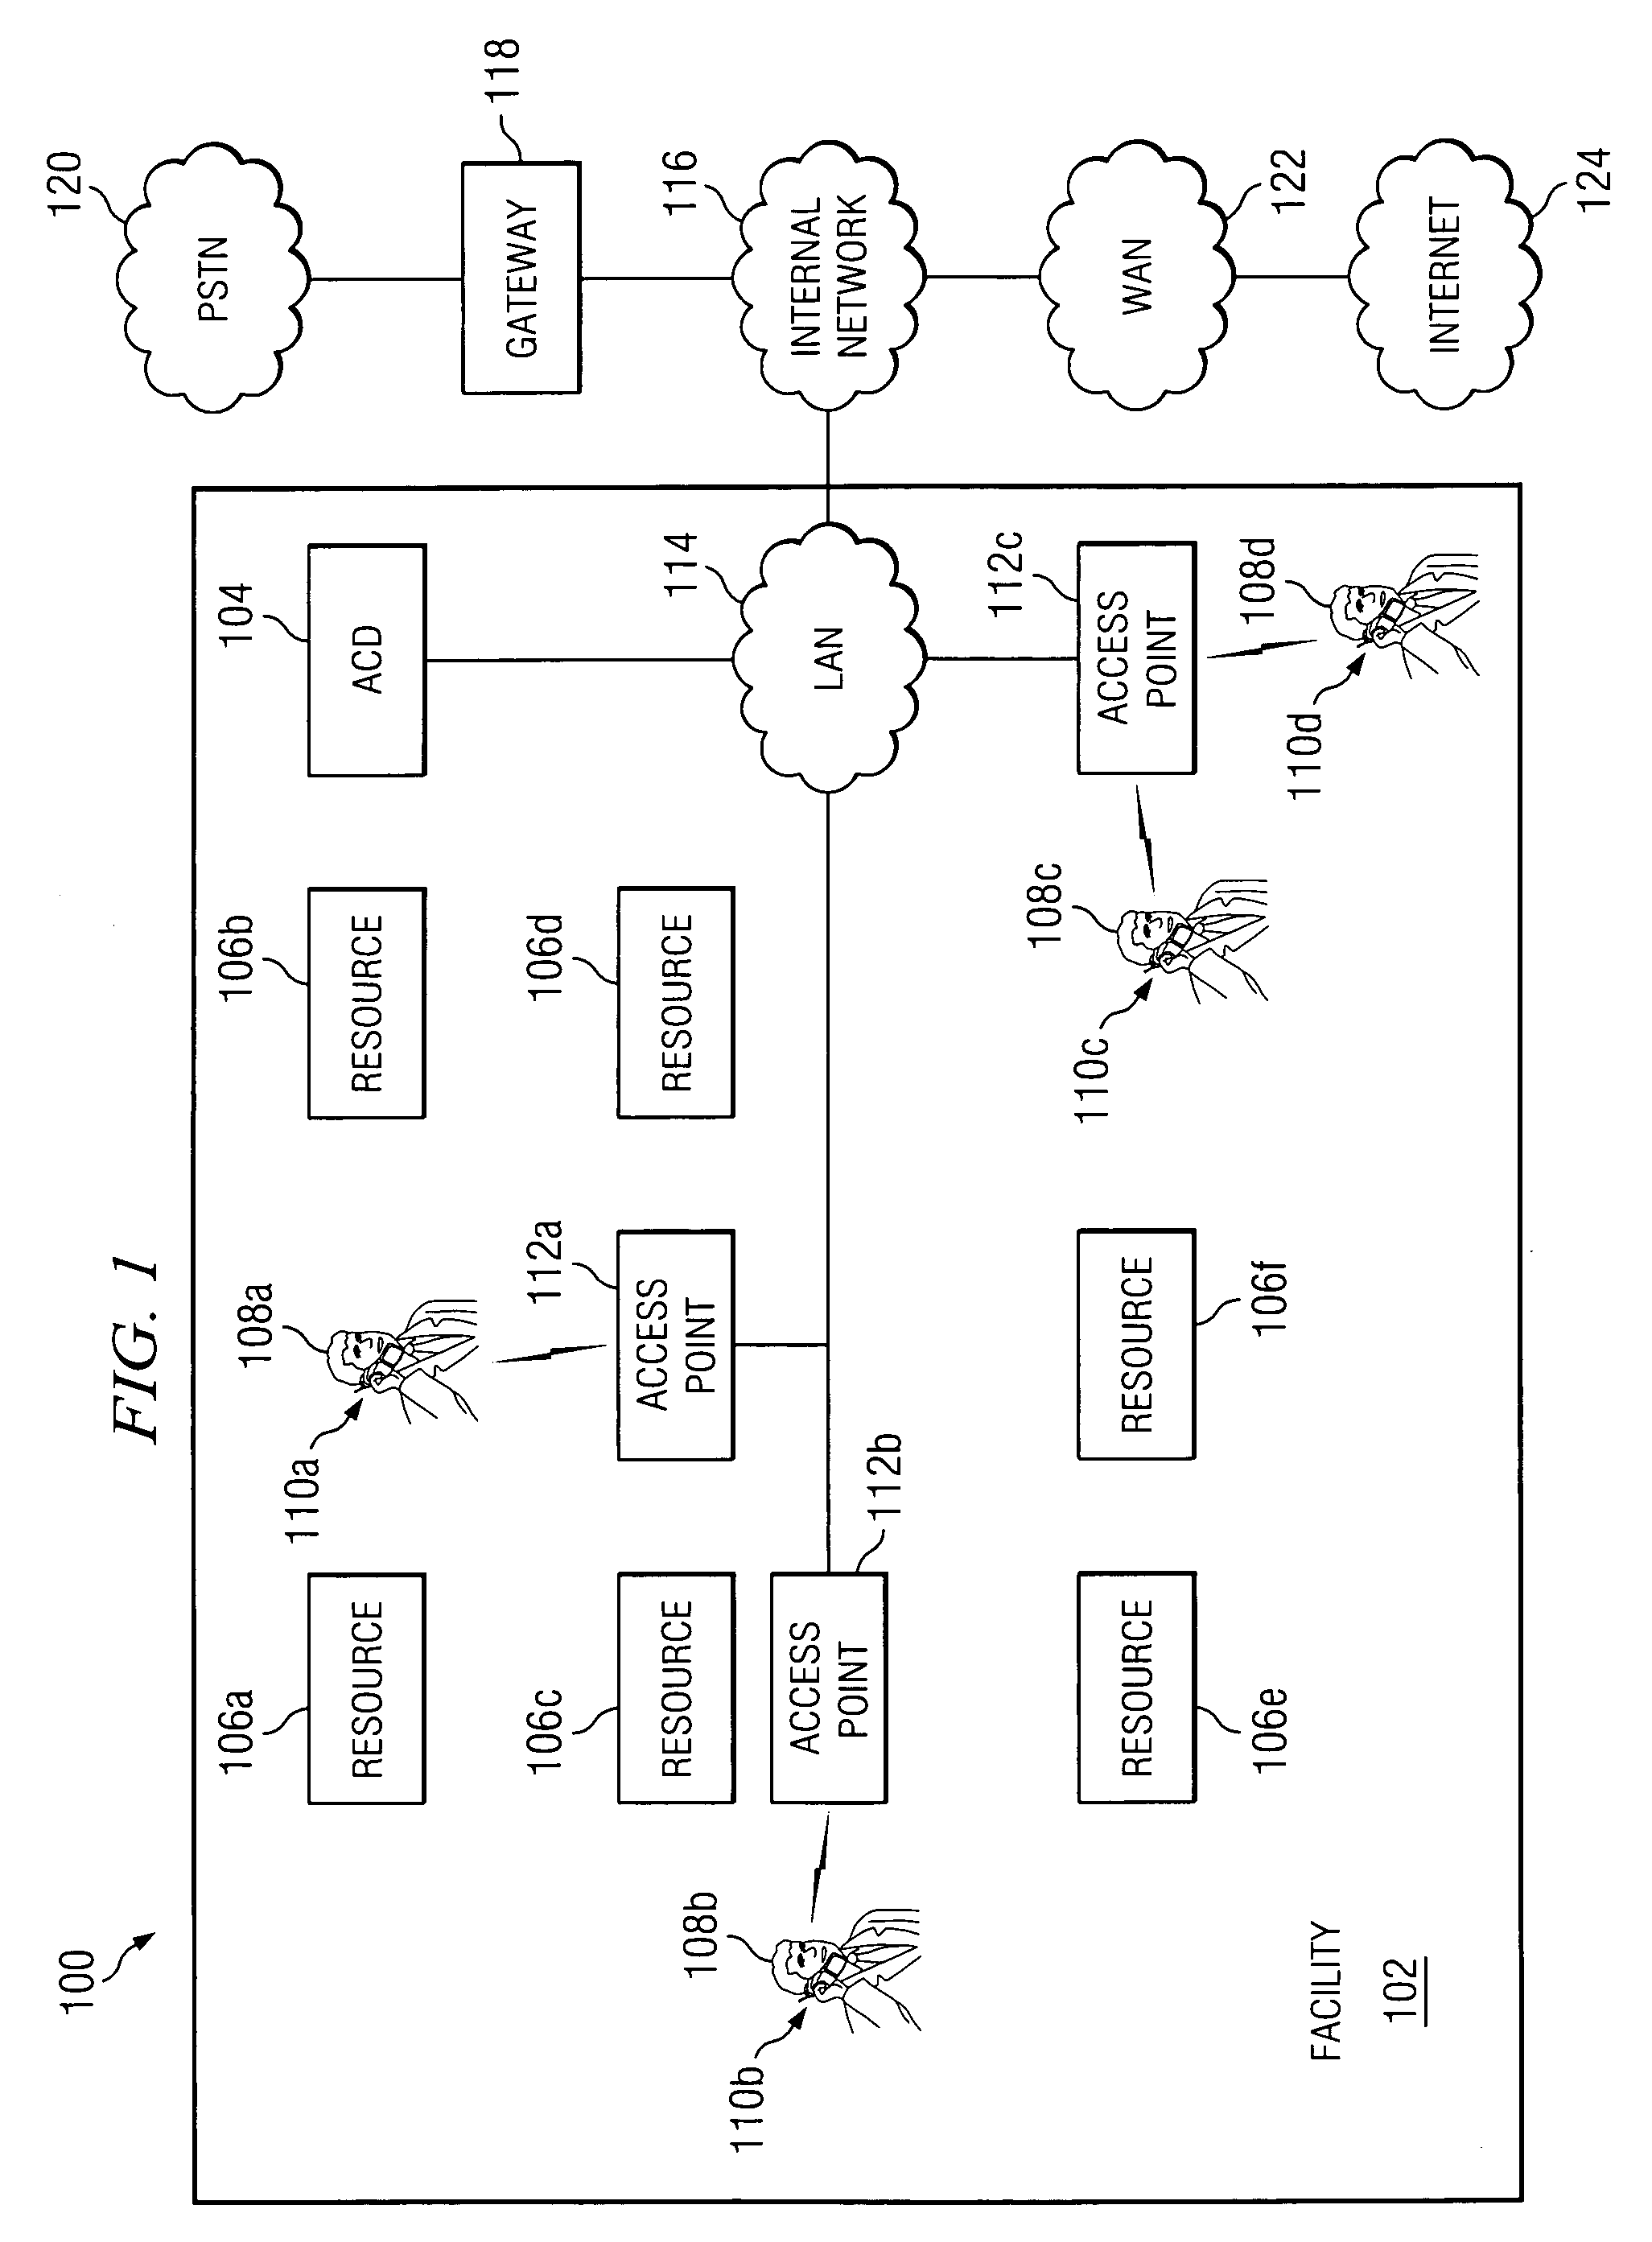 Method and system for automatic call distribution based on location information for call center agents